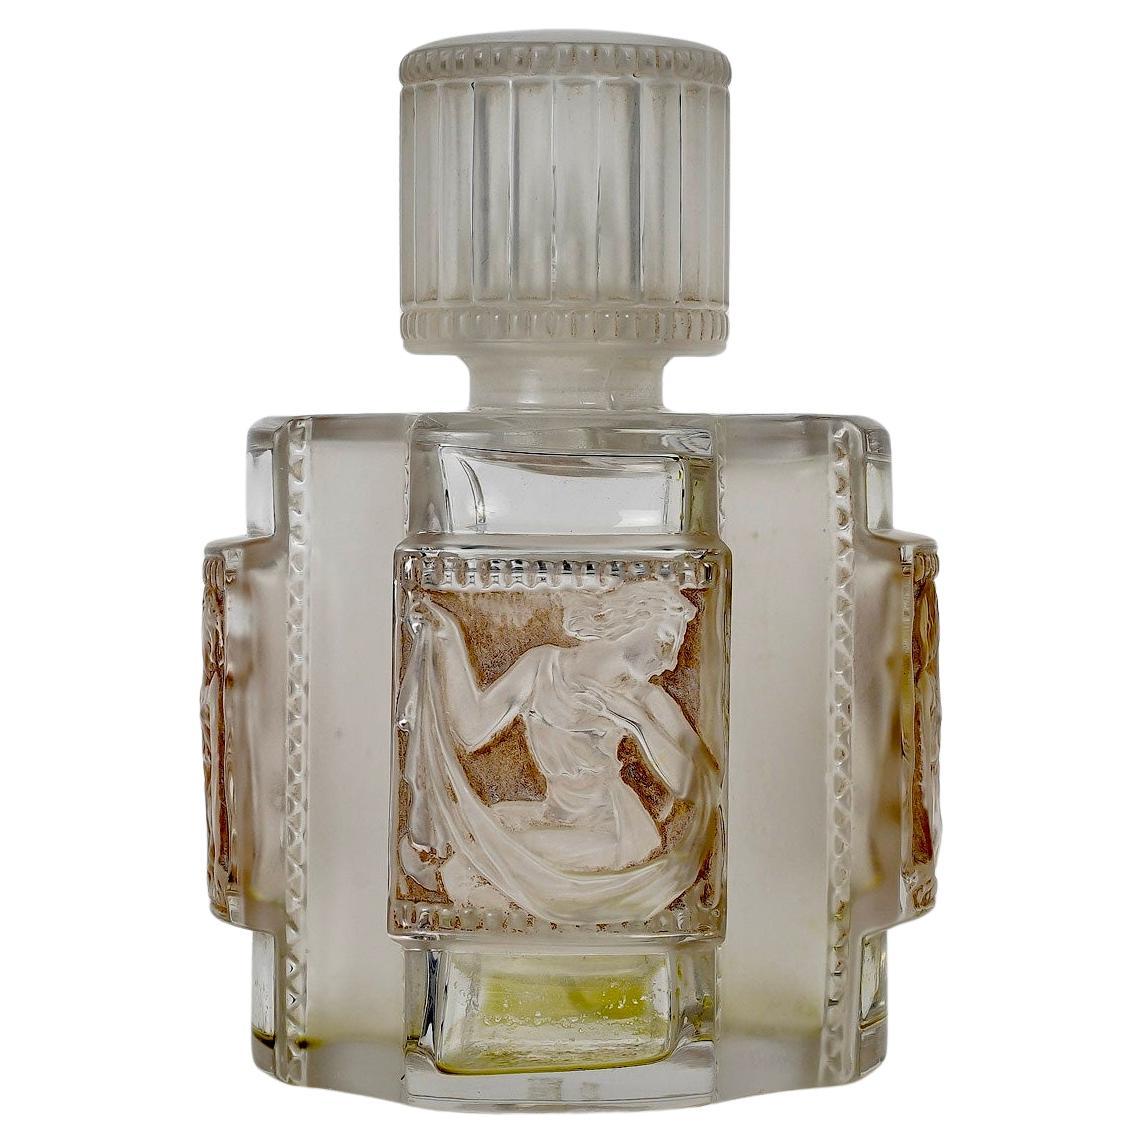 Do Lalique products always have a signature?